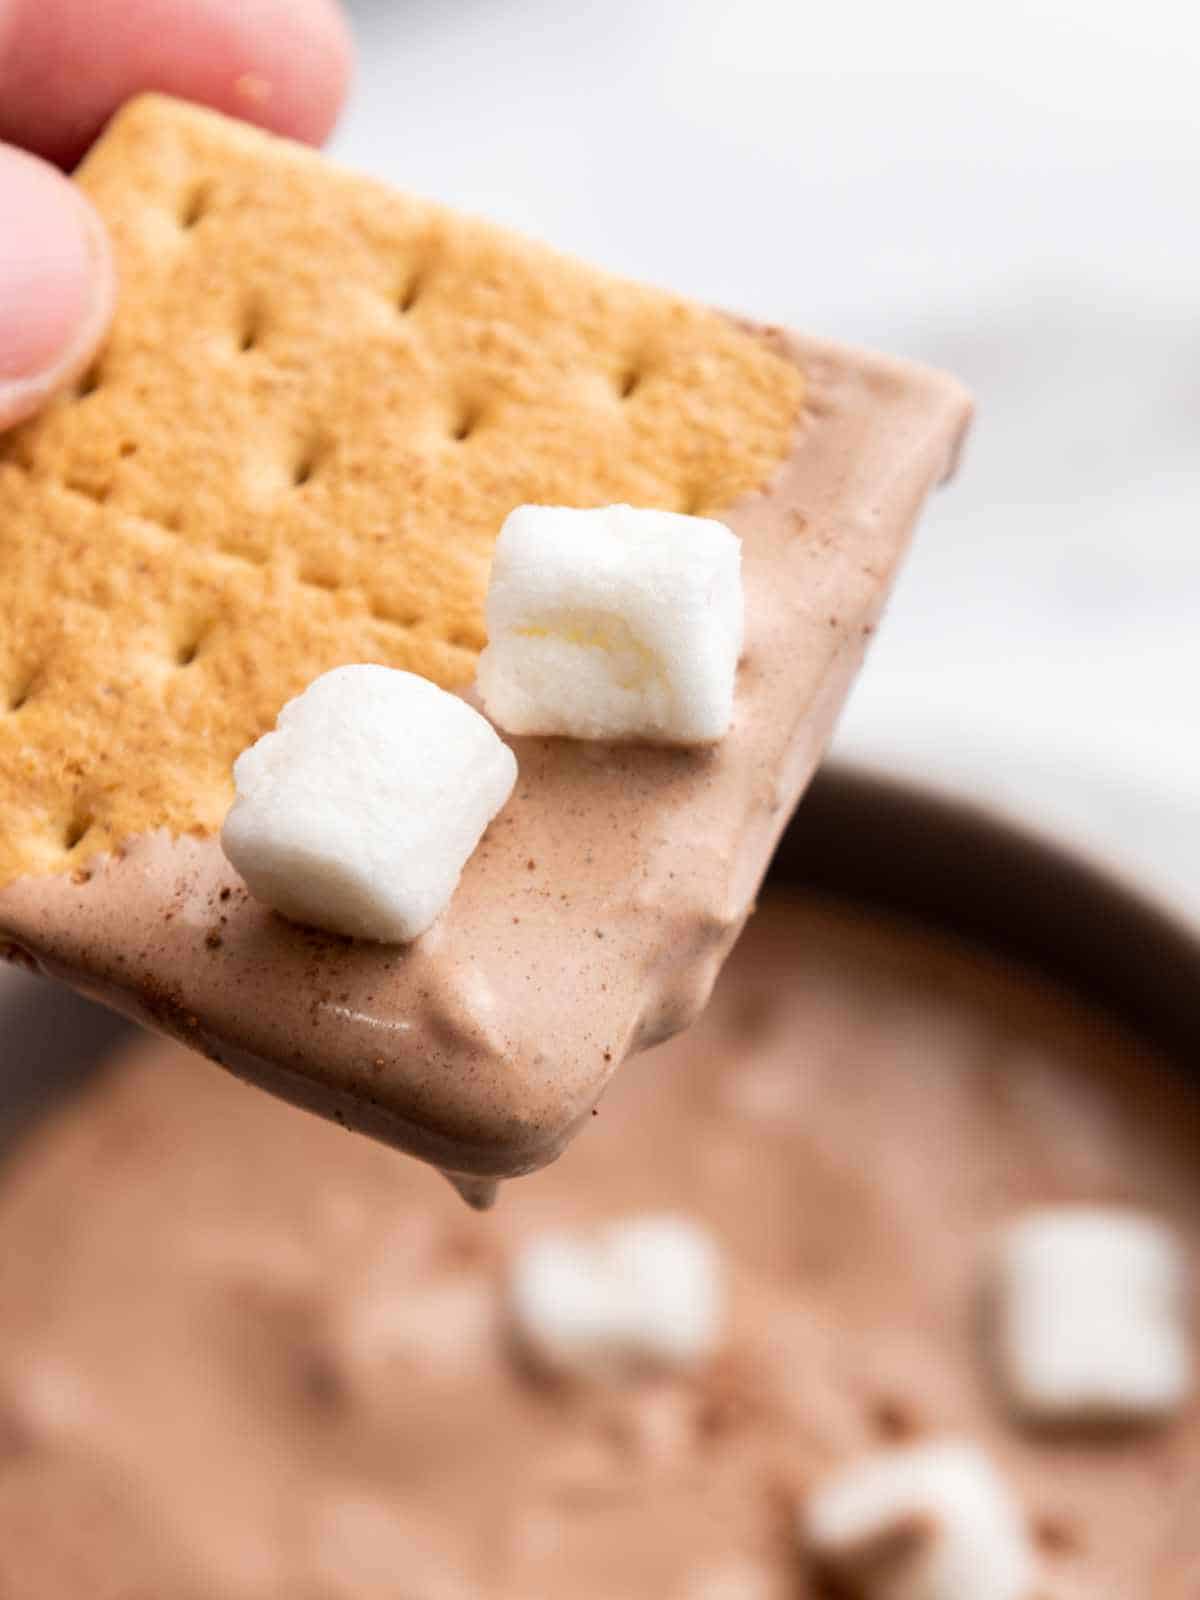 Graham cracker with hot cocoa dip and two mini marshmallows with dip in background.